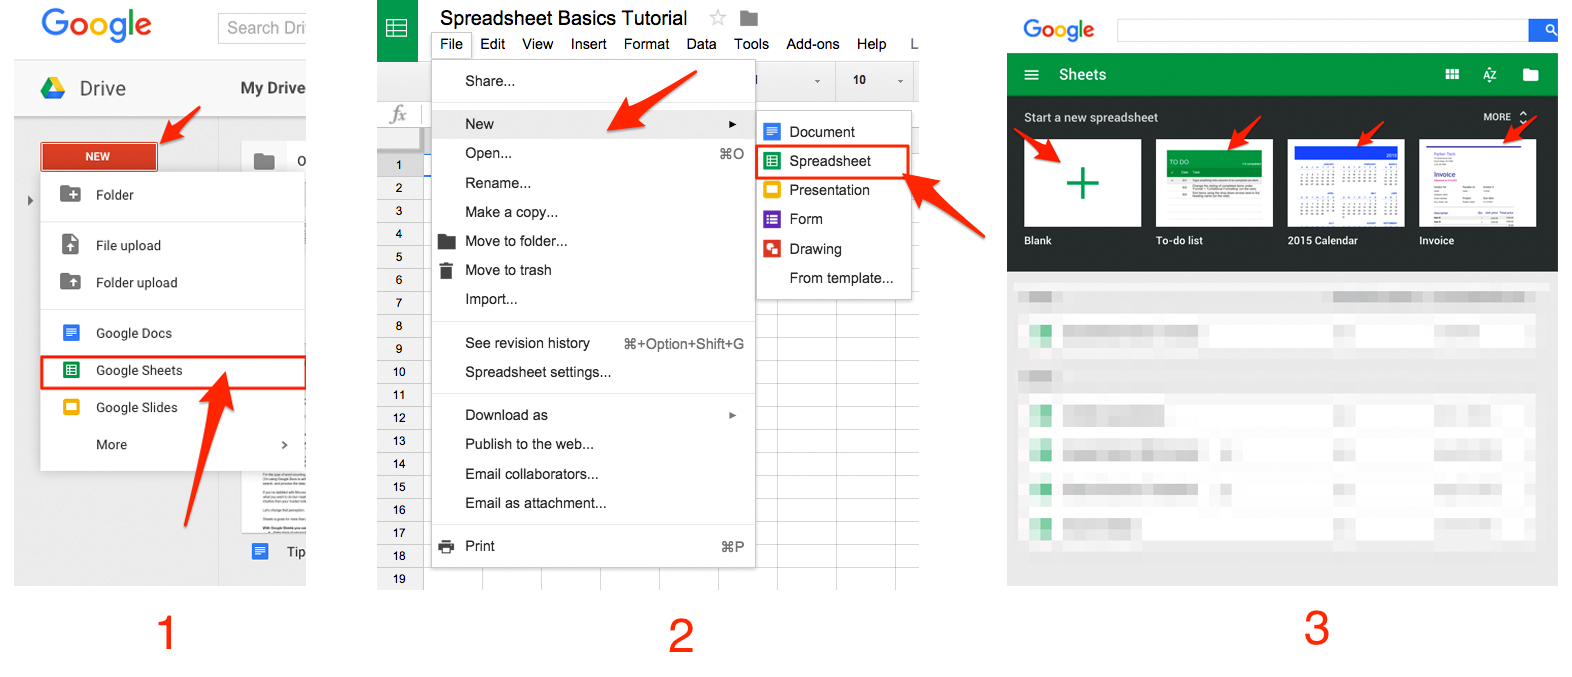 How To Prepare An Excel Spreadsheet For Google Sheets 101: The Beginner's Guide To Online Spreadsheets  The